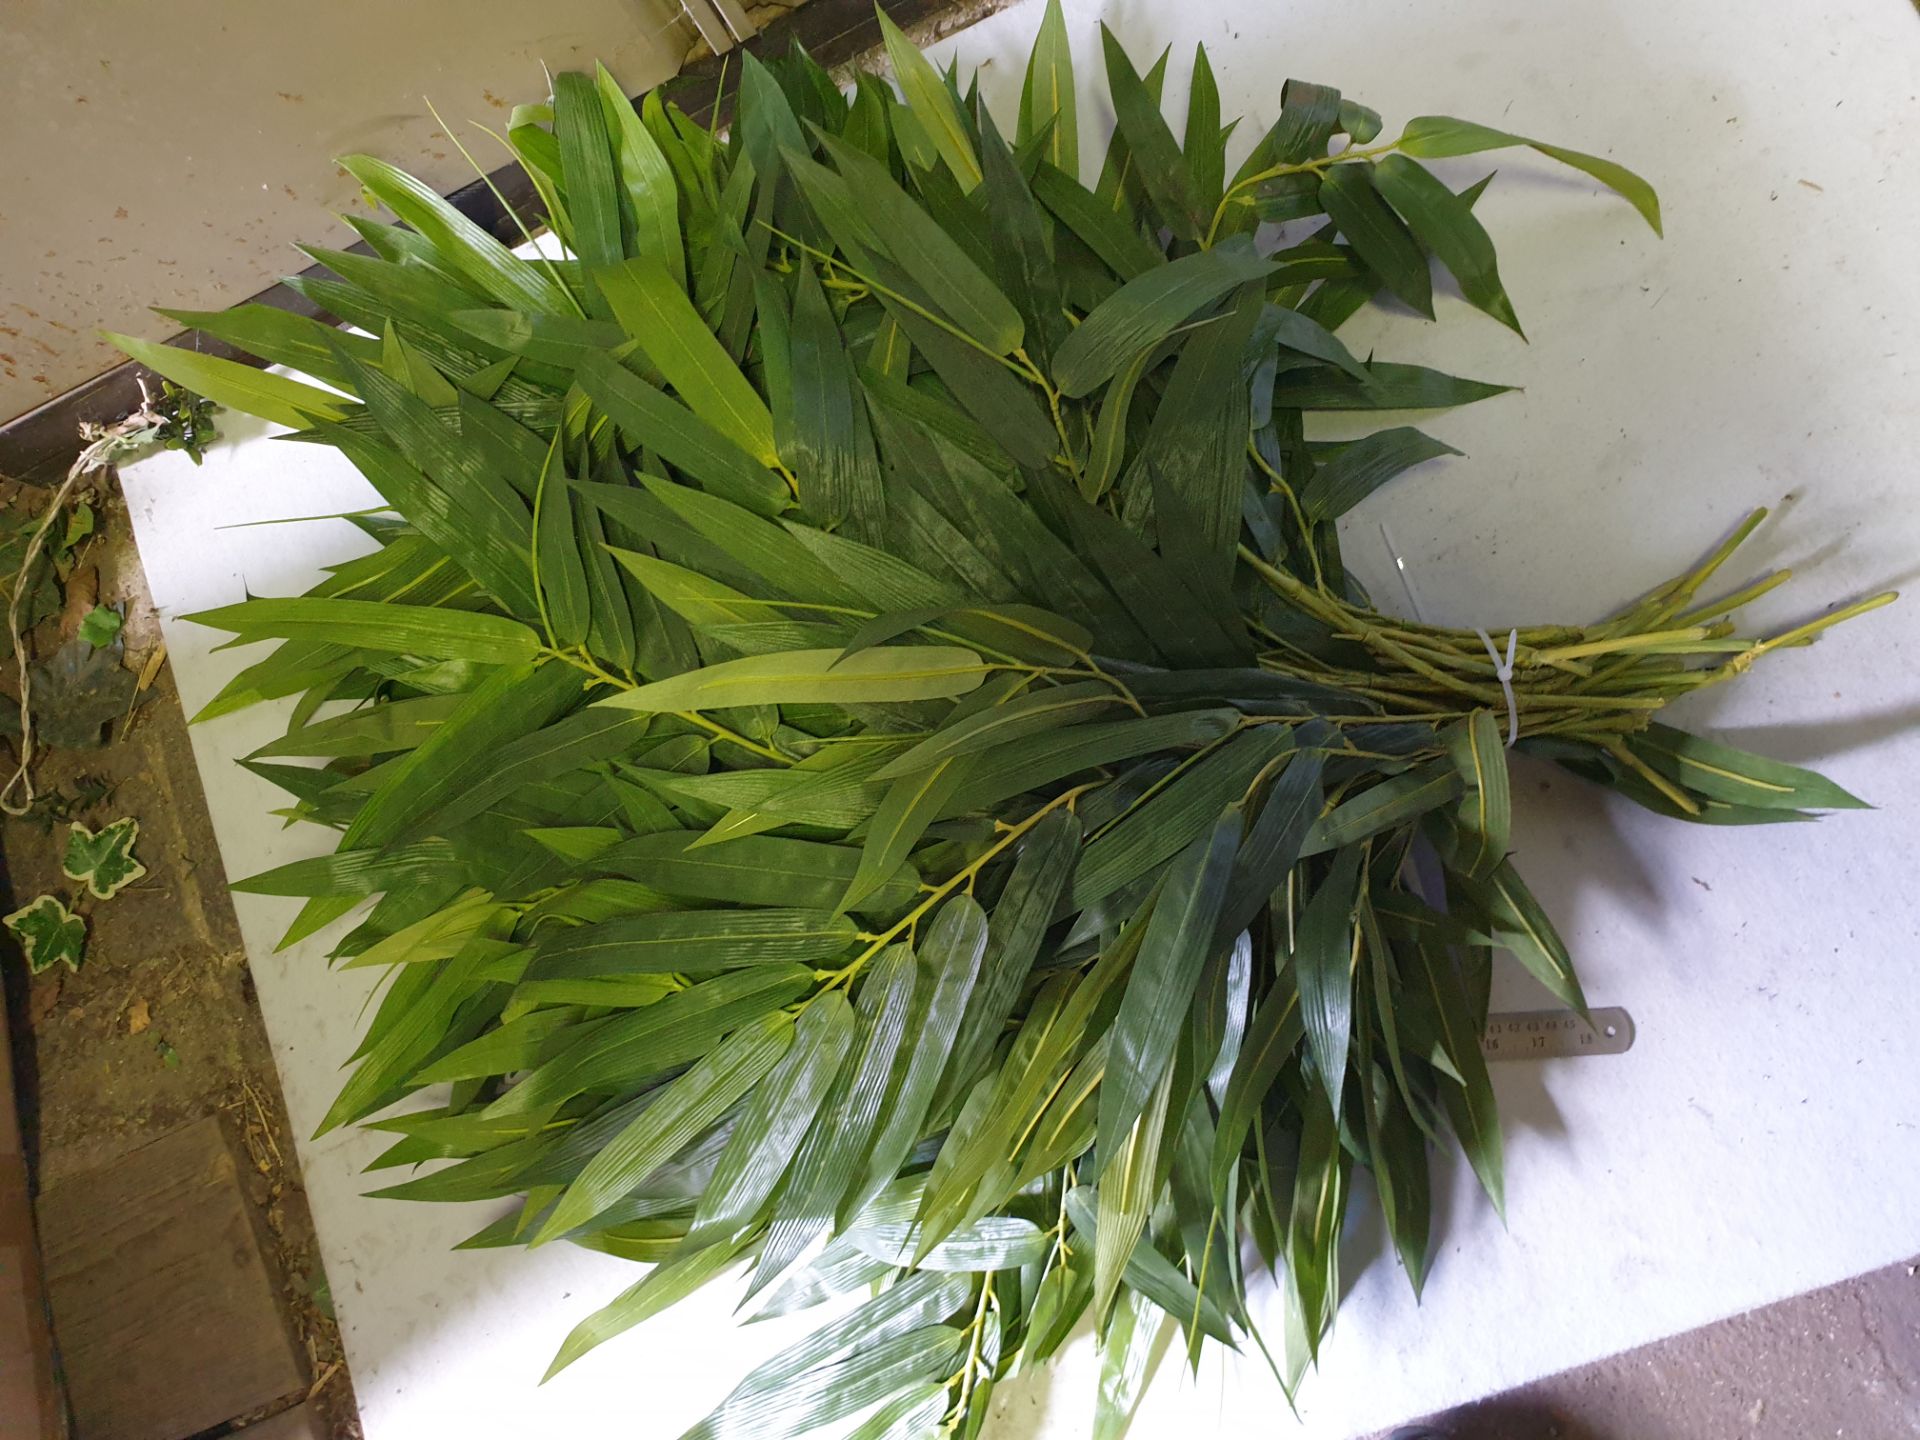 90 x Artifcial Bamboo foliage spray - yellow stem - used once but in good condition - Image 2 of 2